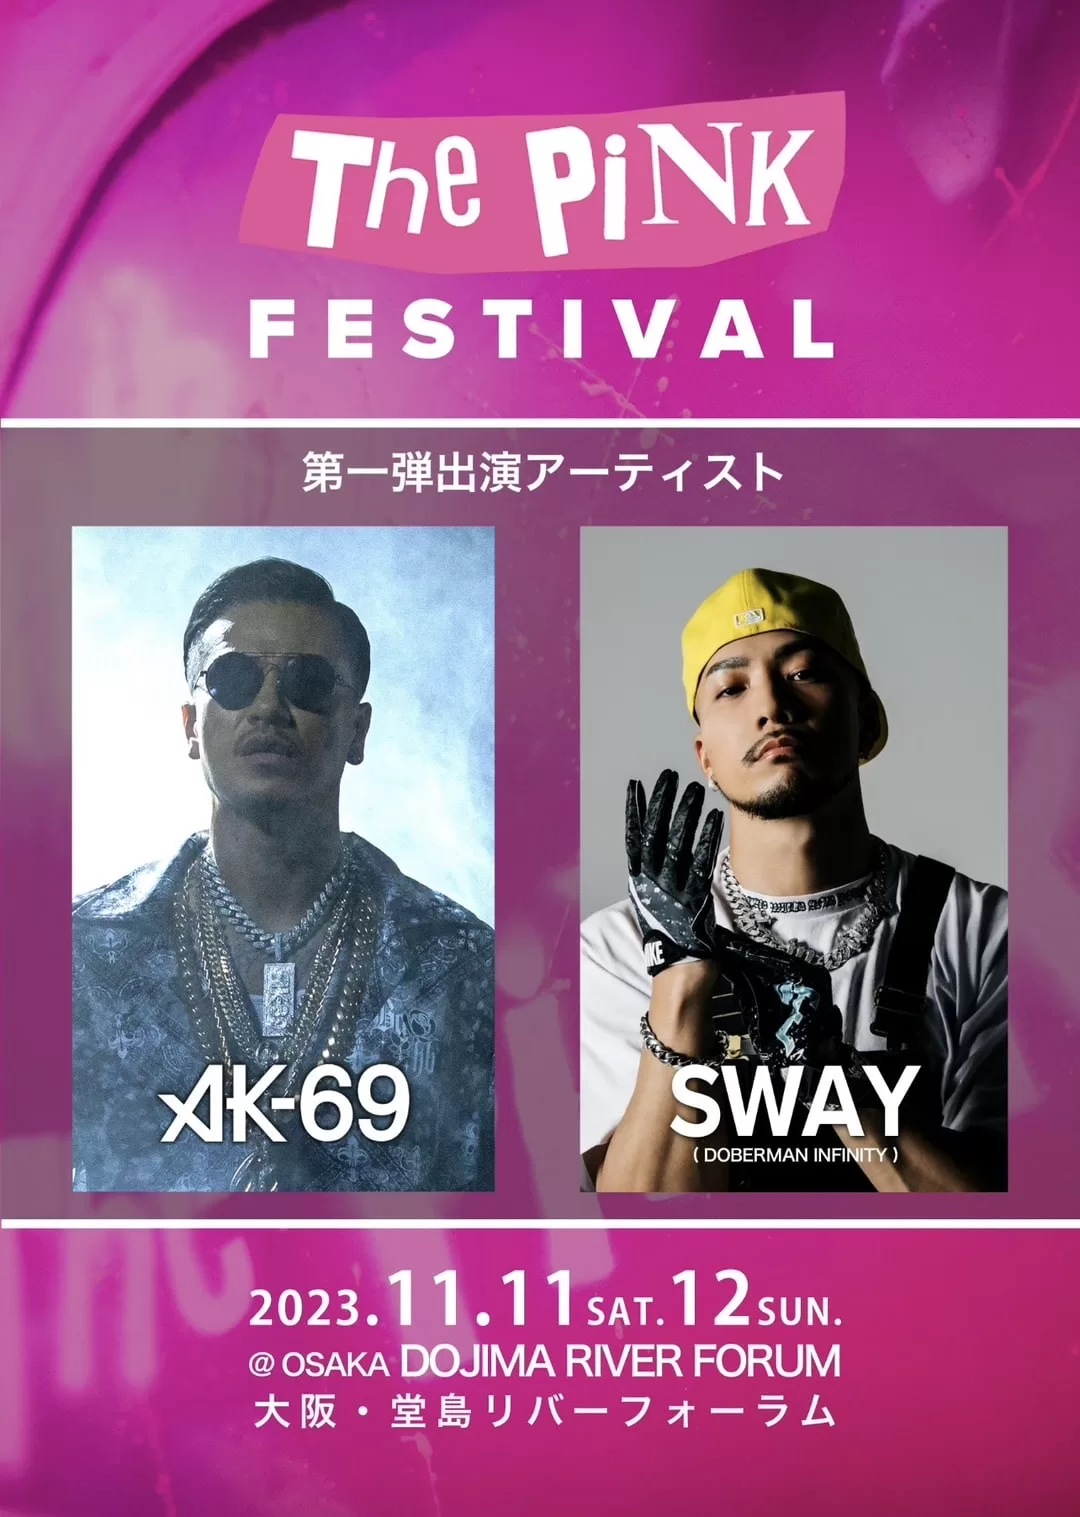 「THE PINK FESTIVAL 2023」 にSWAY出演決定!!